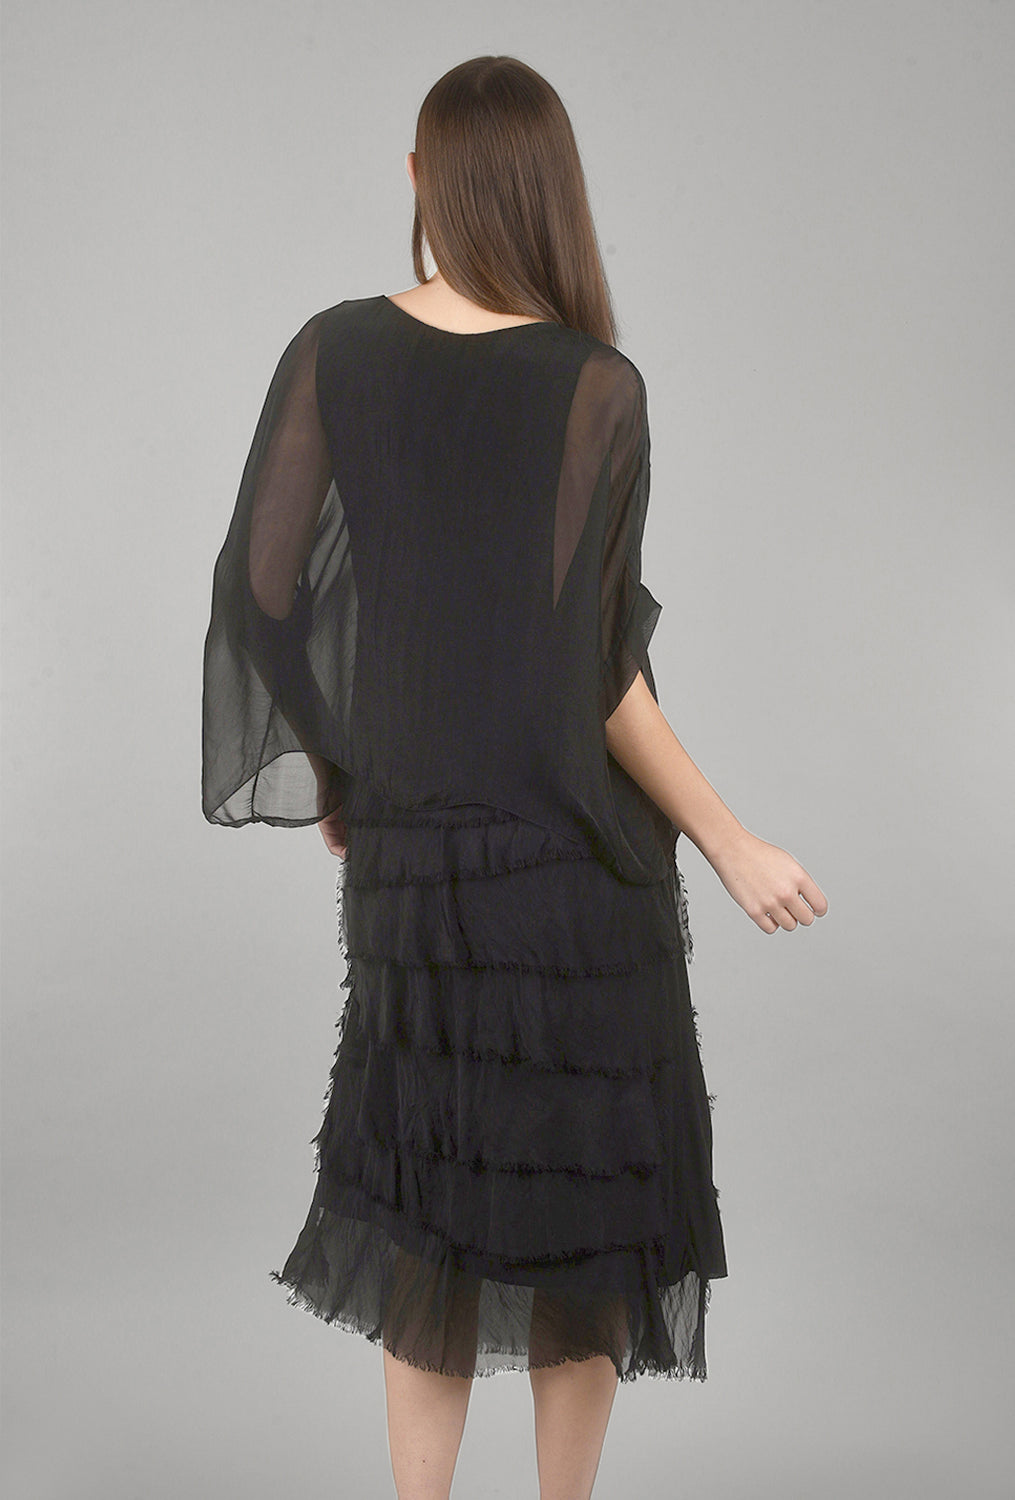 Sleeved Tattered-Tiers Dress, Black